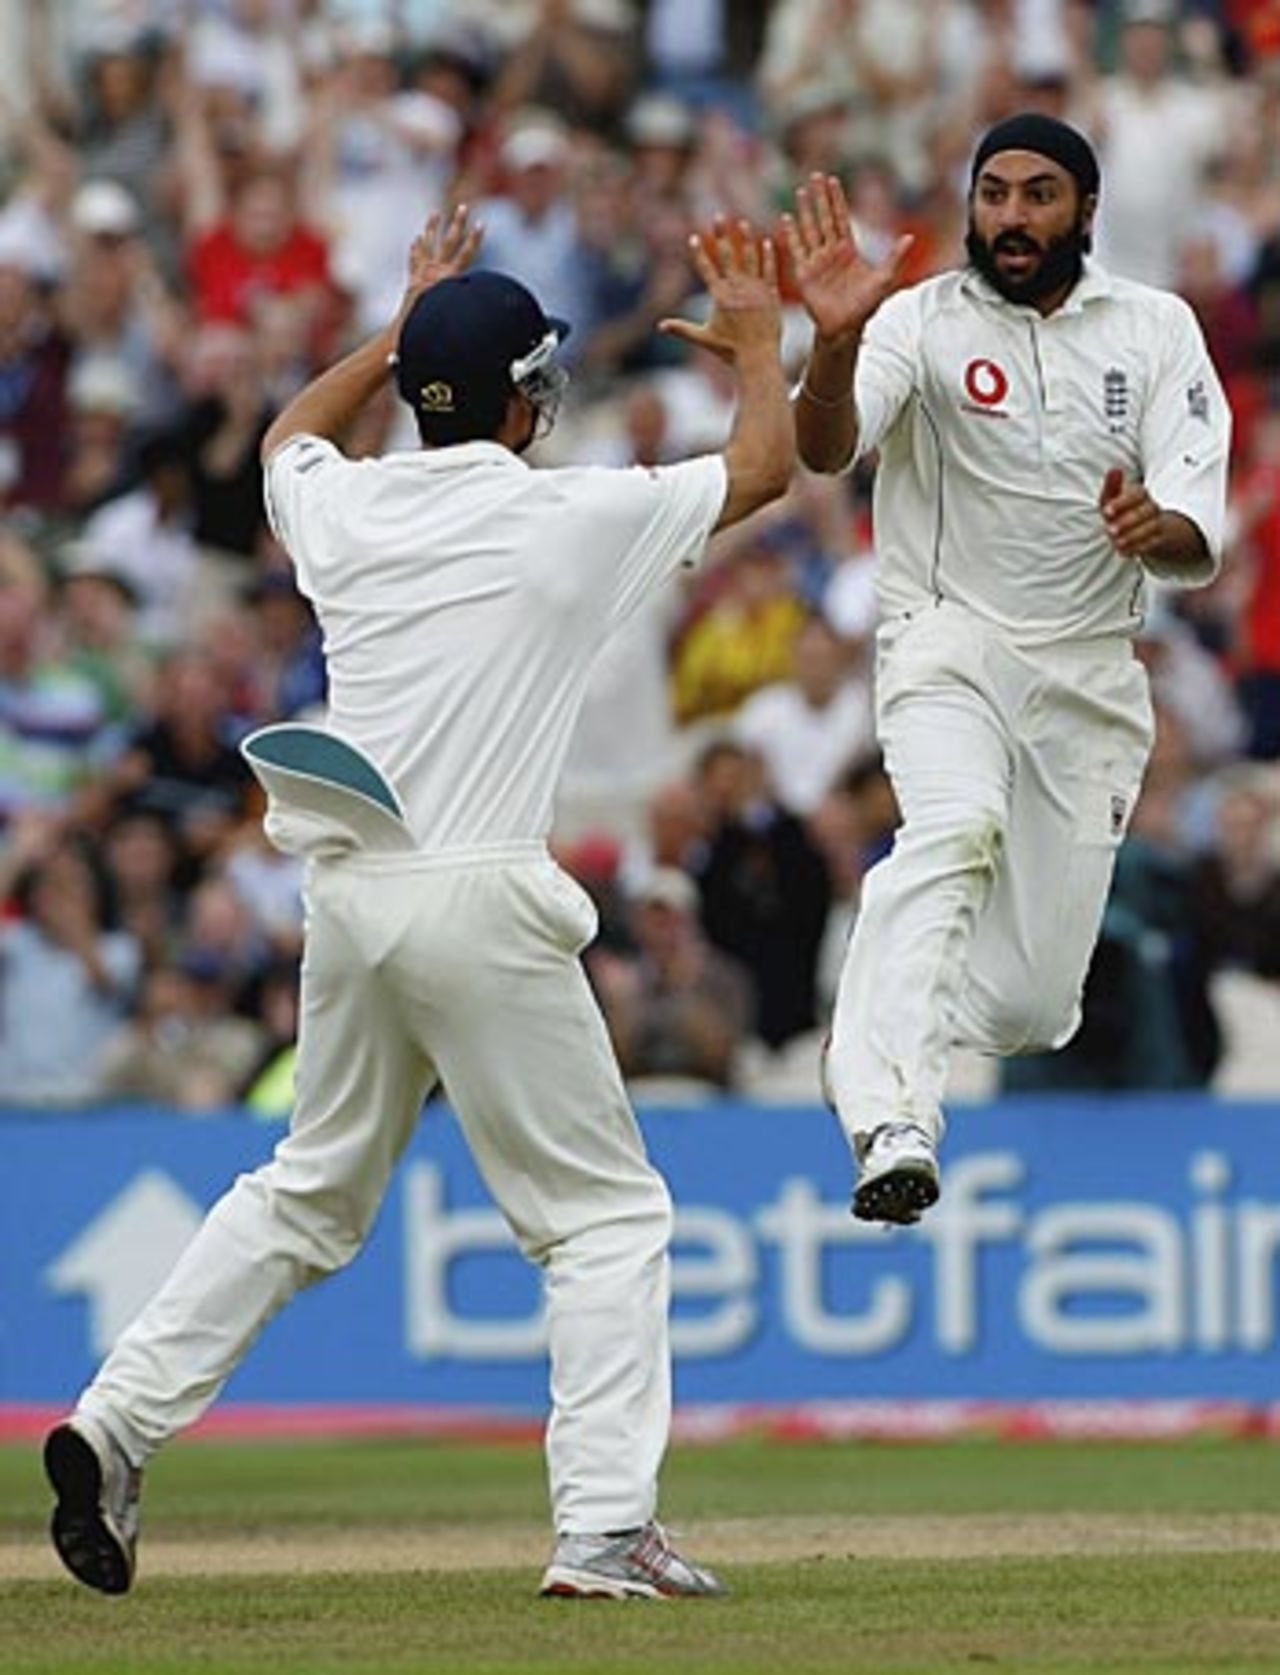 Monty Panesar celebrates another wicket with Alastair Cook, England v Pakistan, 2nd Test, Old Trafford, July 29, 2006